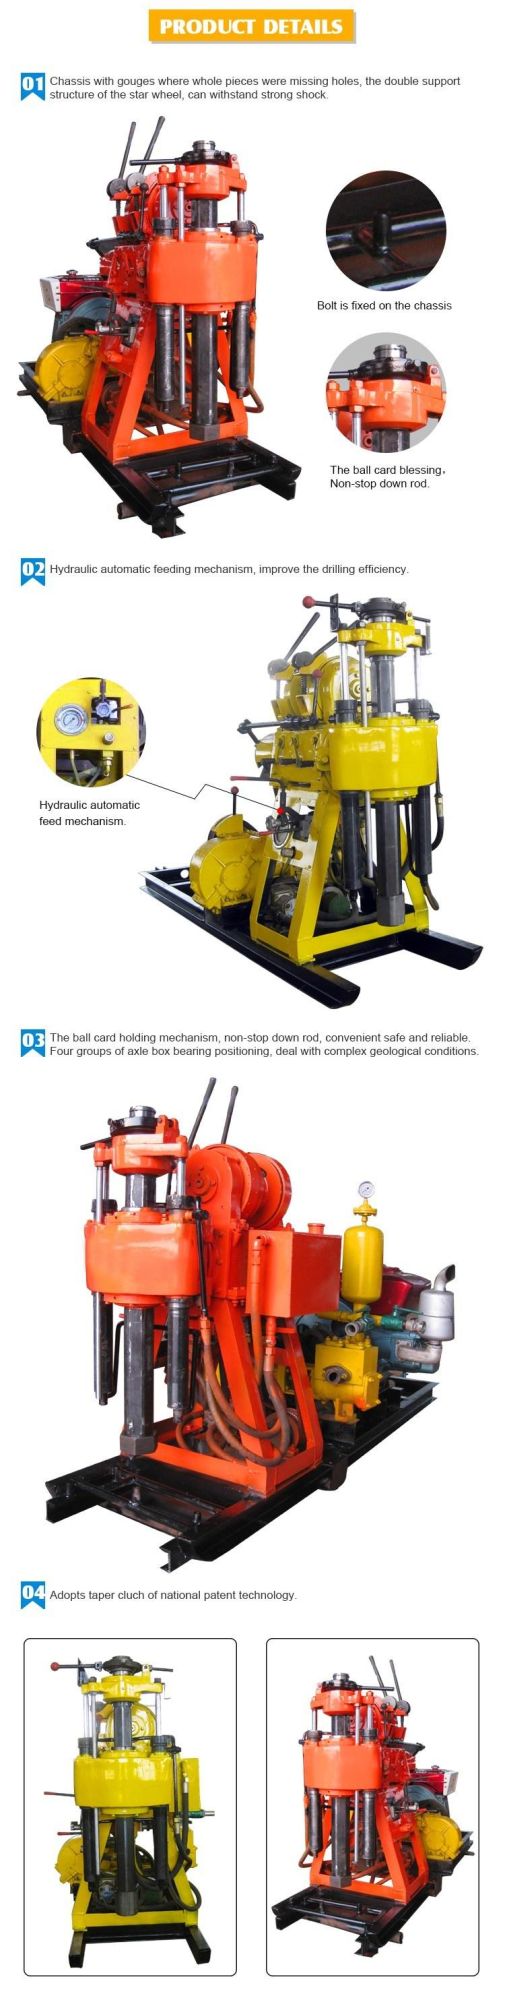 D Miningwell Hz-130yy Core Drill Rig Movable Cheap Rock Drill Rig Portable High Quality Hydraulic Drill Rig for Sale